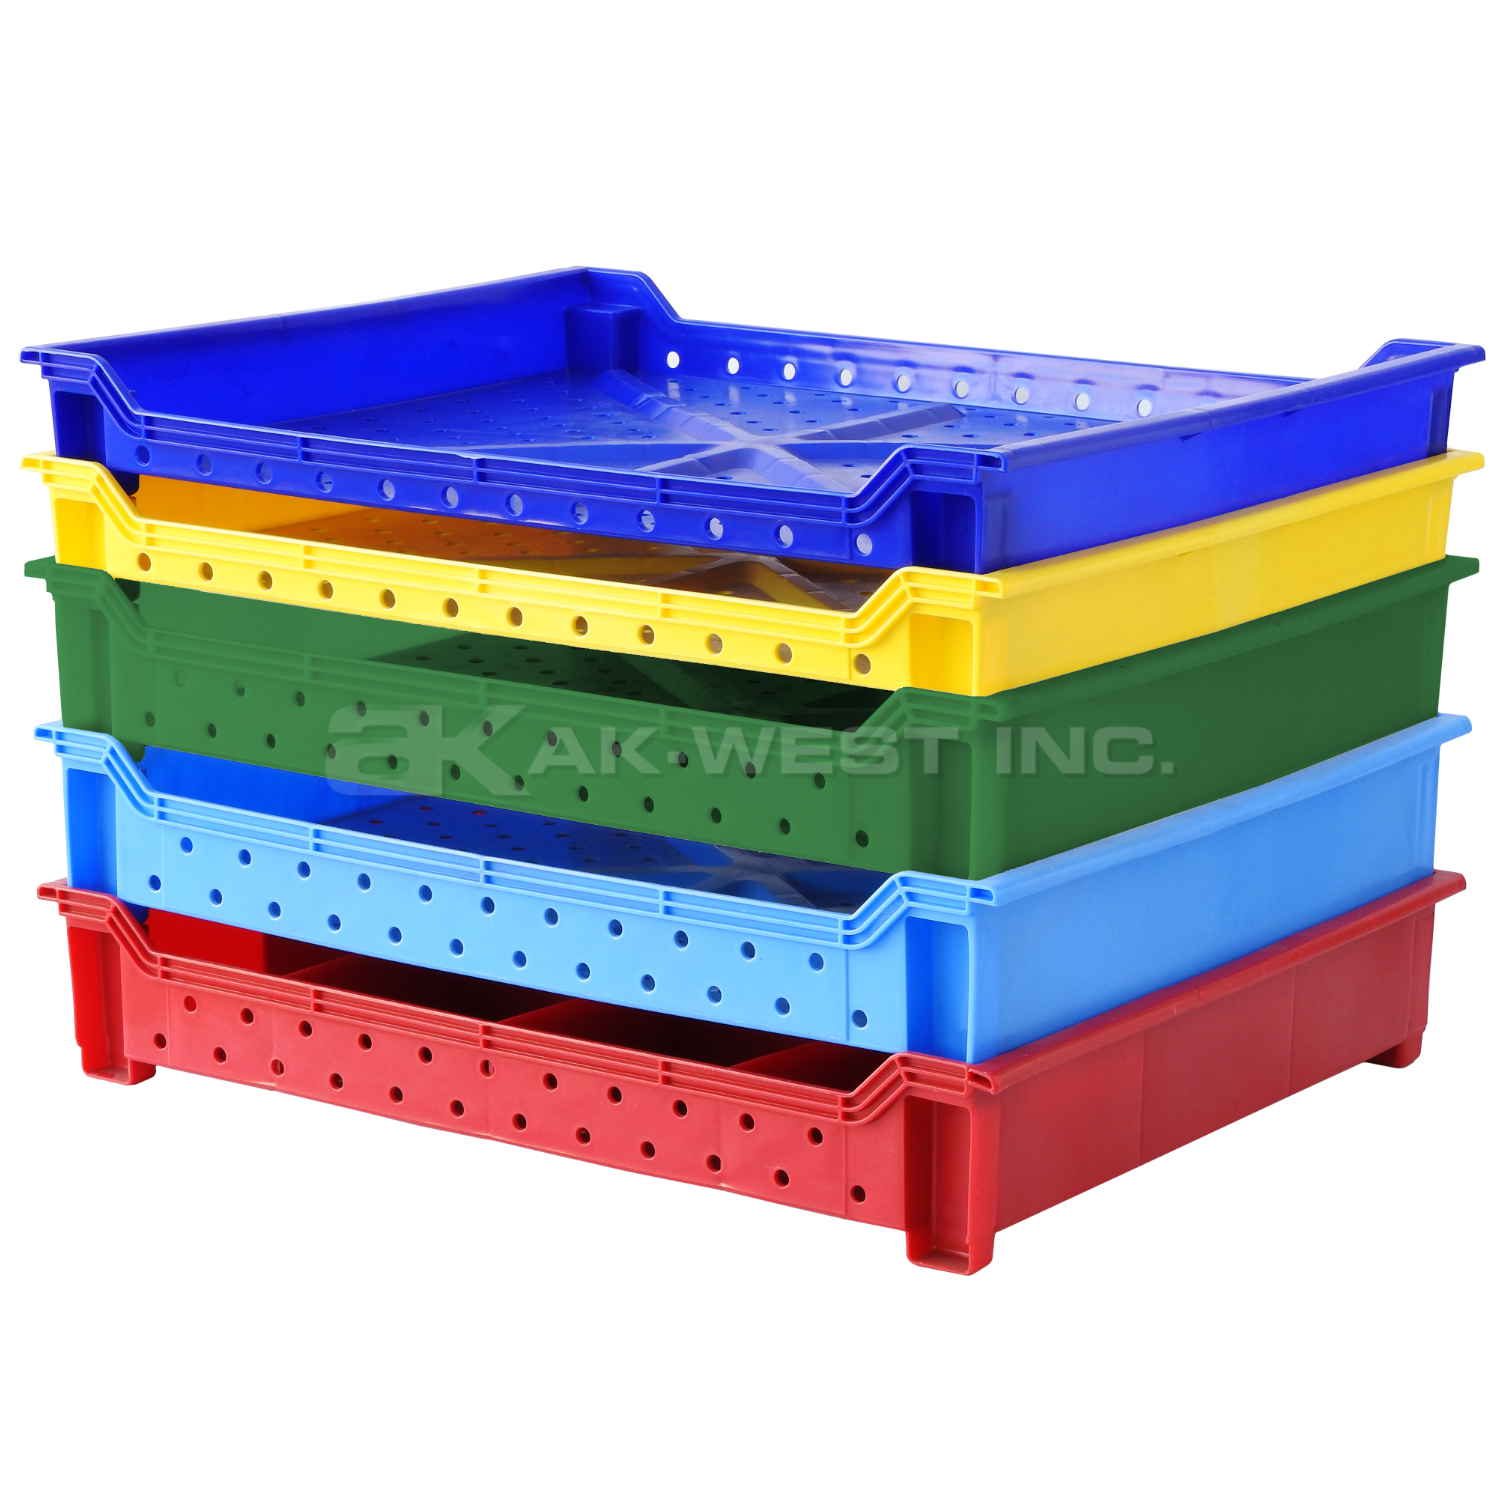 Lt. Blue, 24"L x 18"W x 3"H Stackable Tray w/ Vented Sides and Base